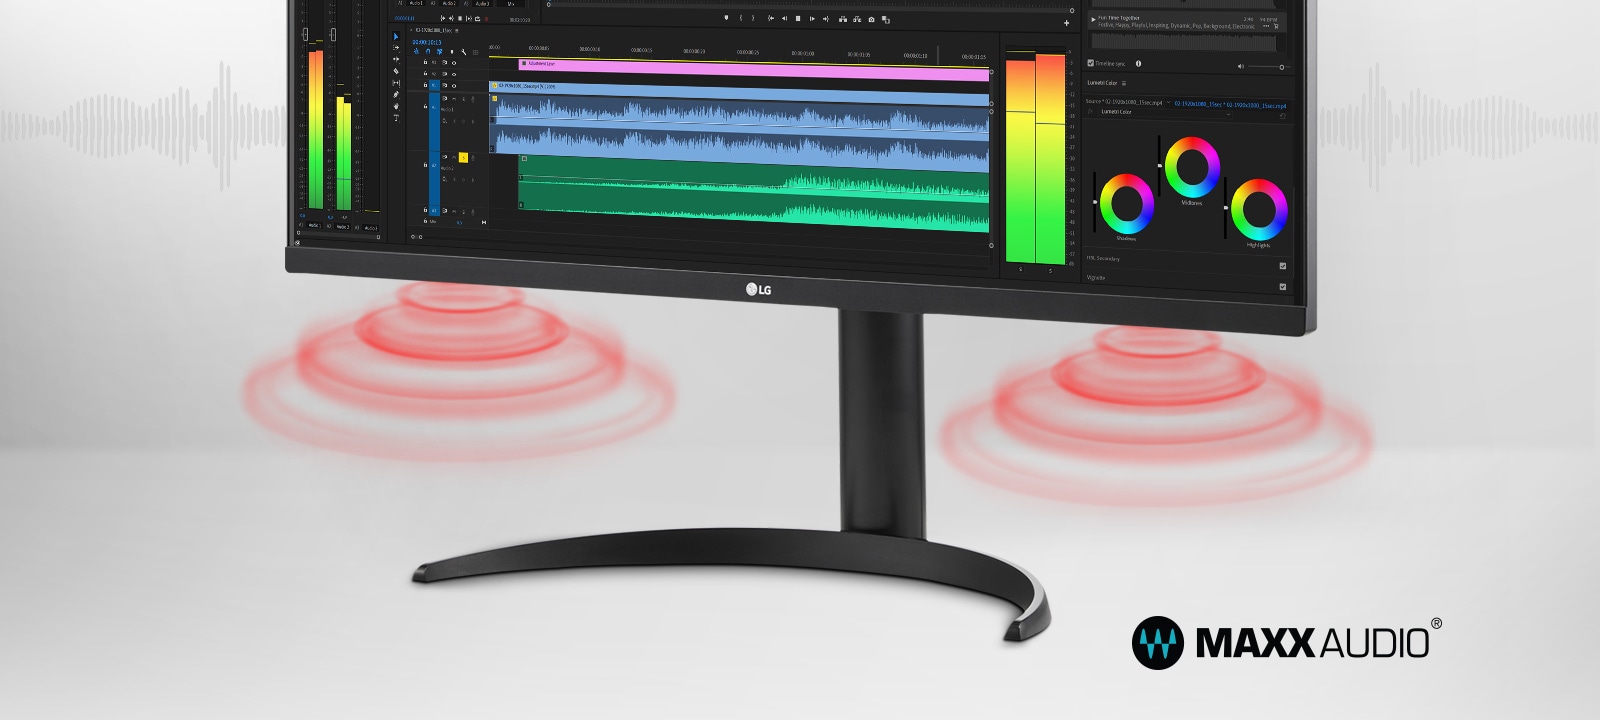 This monitor supports a built-in stereo speaker with MaxxAudio that helps you save desk space and delivers audio clarity.